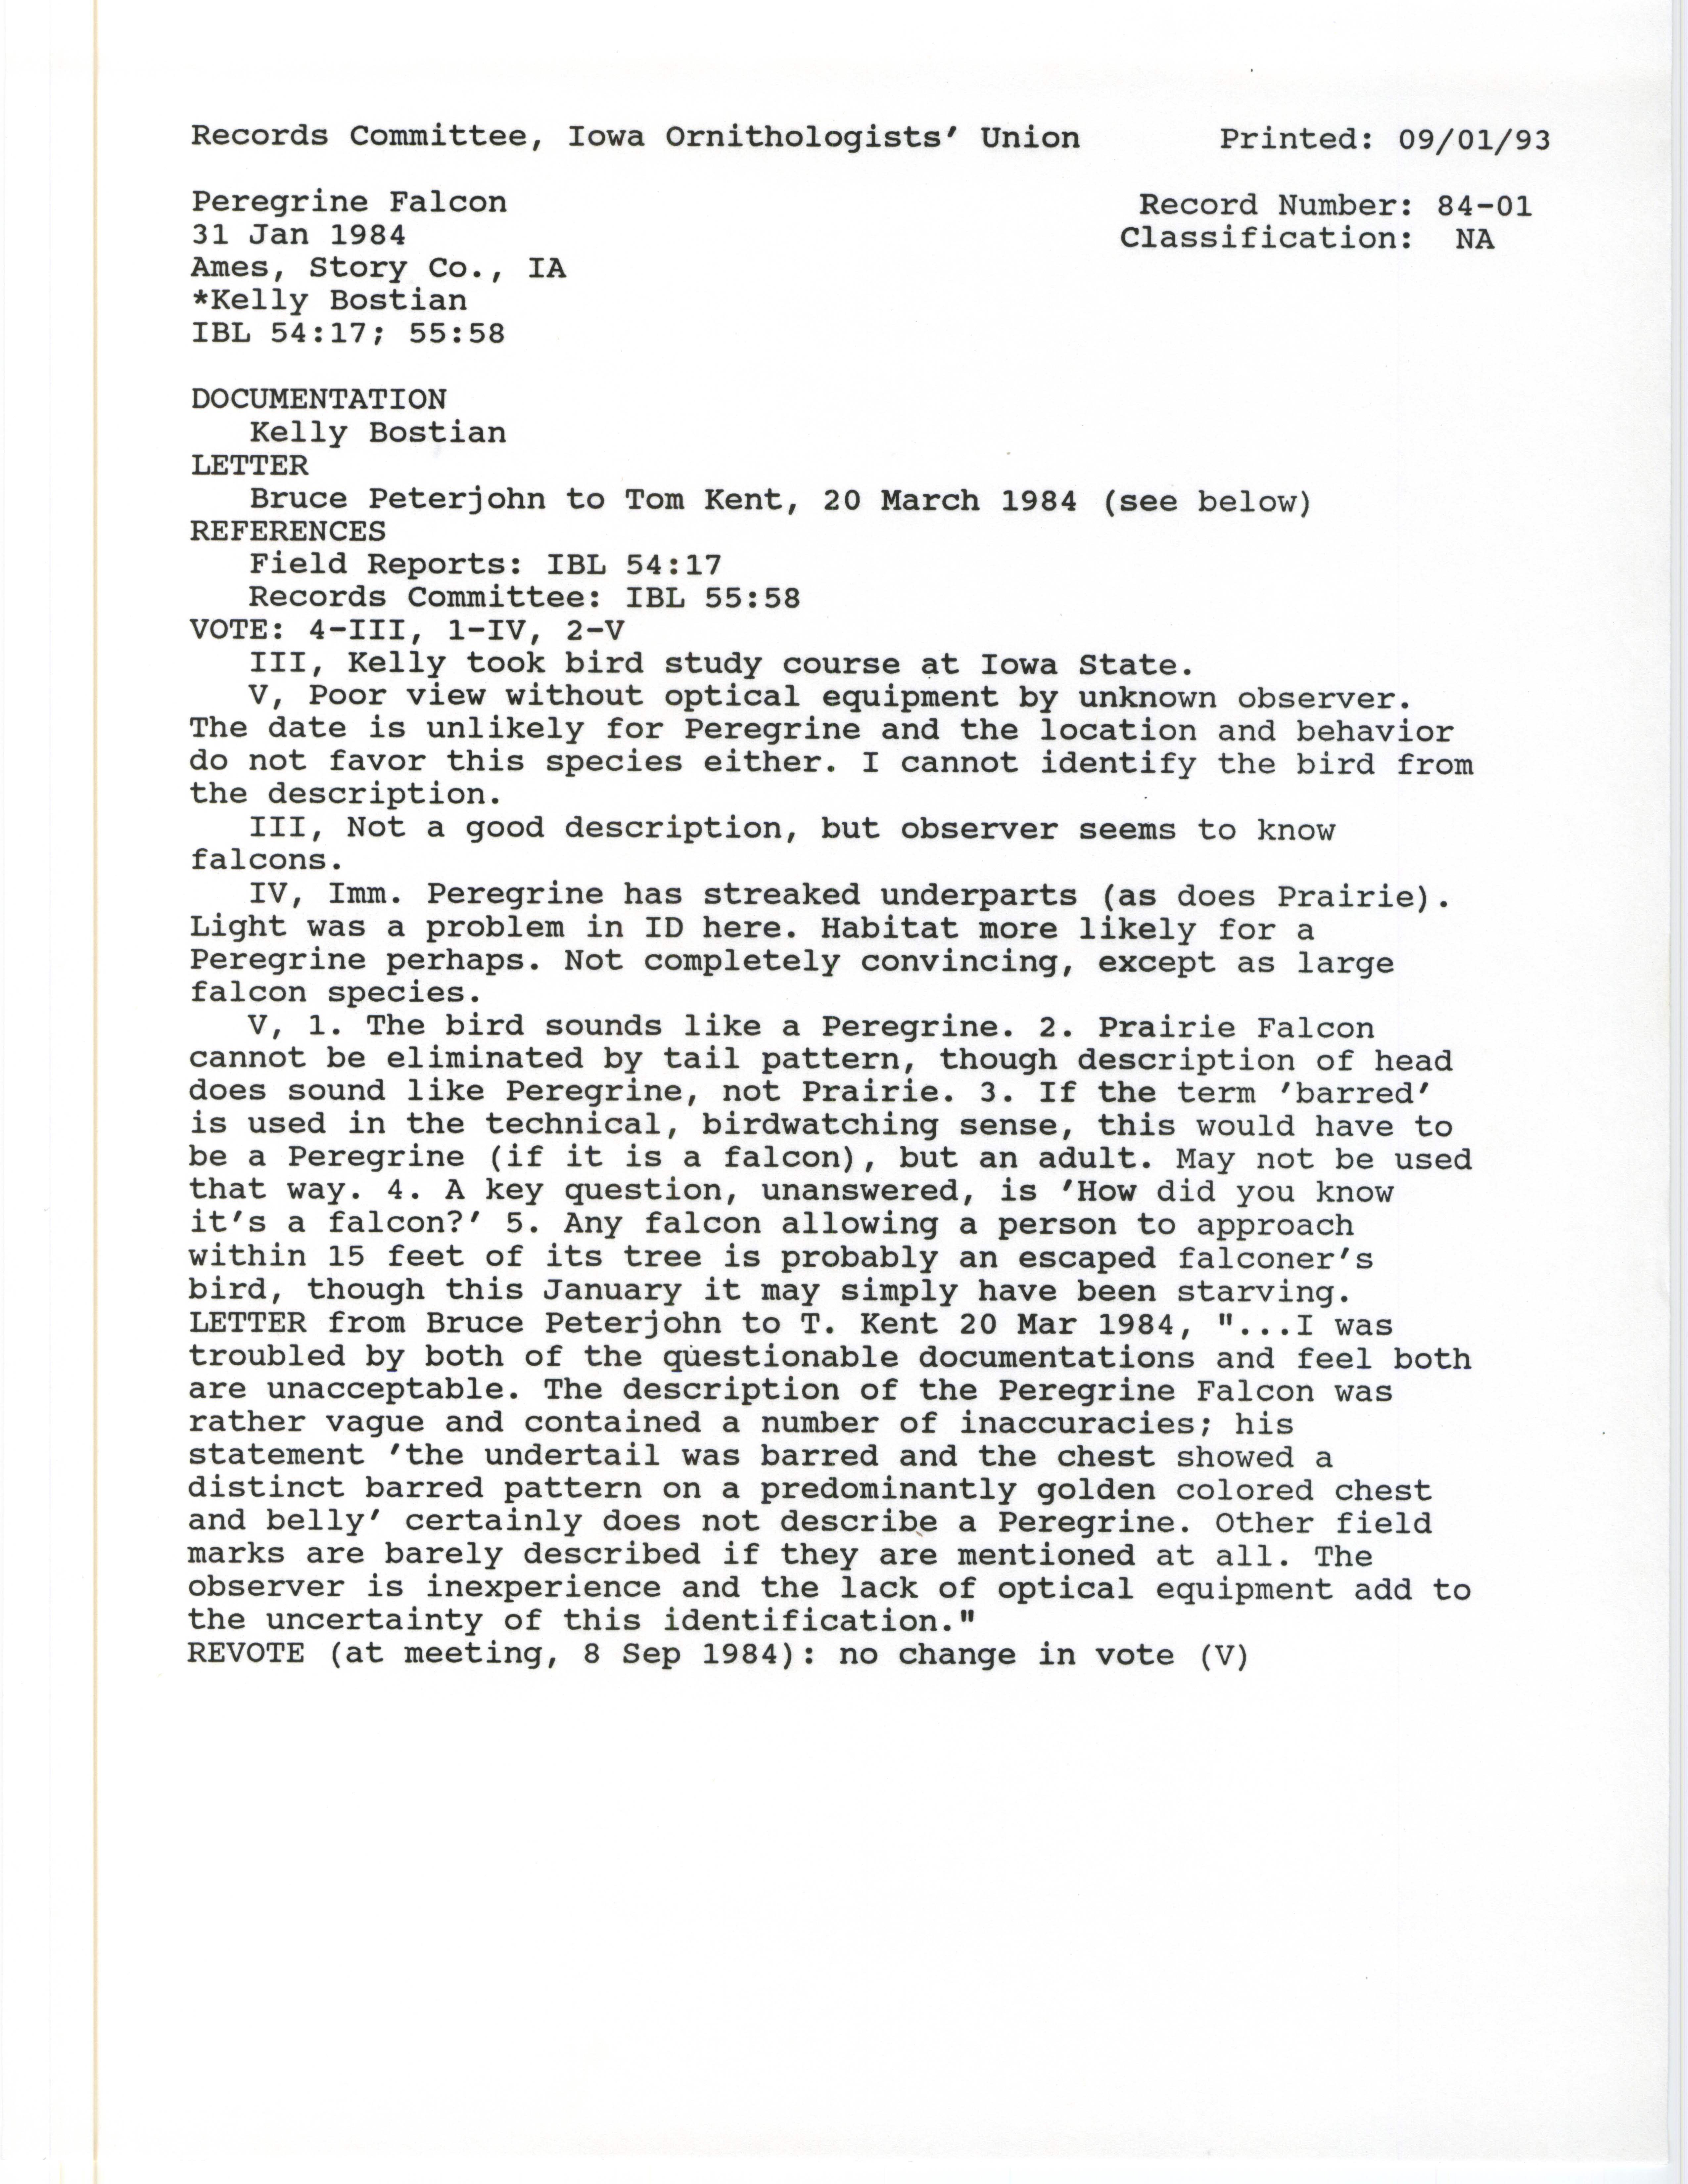 Records Committee review for rare bird sighting of Peregrine Falcon at Ames, 1984